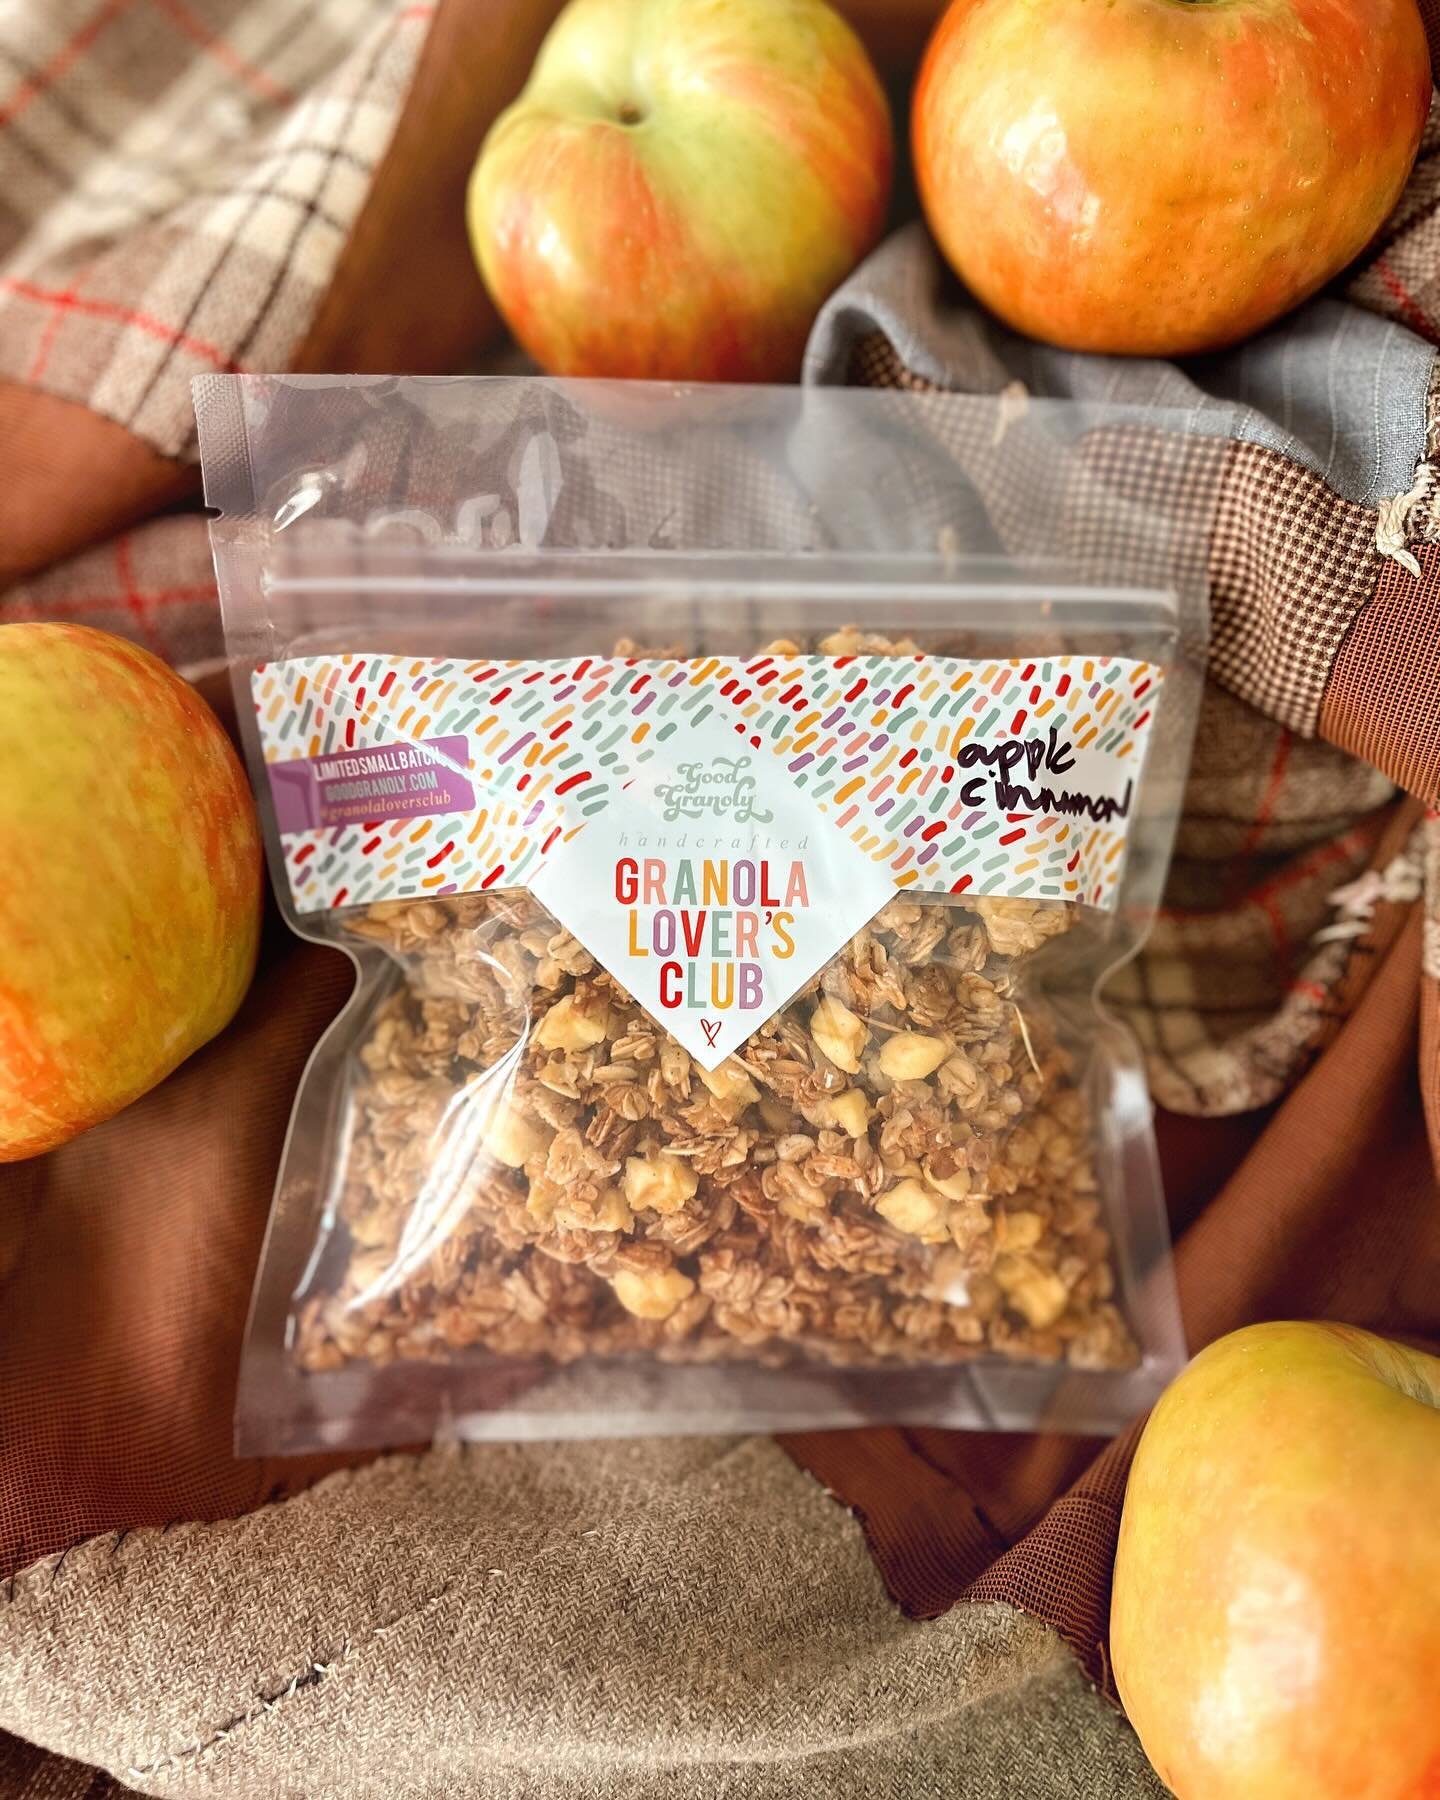 Drumrollllll for May&rsquo;s flavor of the month 🥁
APPLE CINNAMON 🍎🤎
A delicious, classic flavor combination. Baked with apples and cinnamon, nut free and finished off with naturally sweet dried Fuji apples. Yum diddddly dum 😋 
💌 order now throu